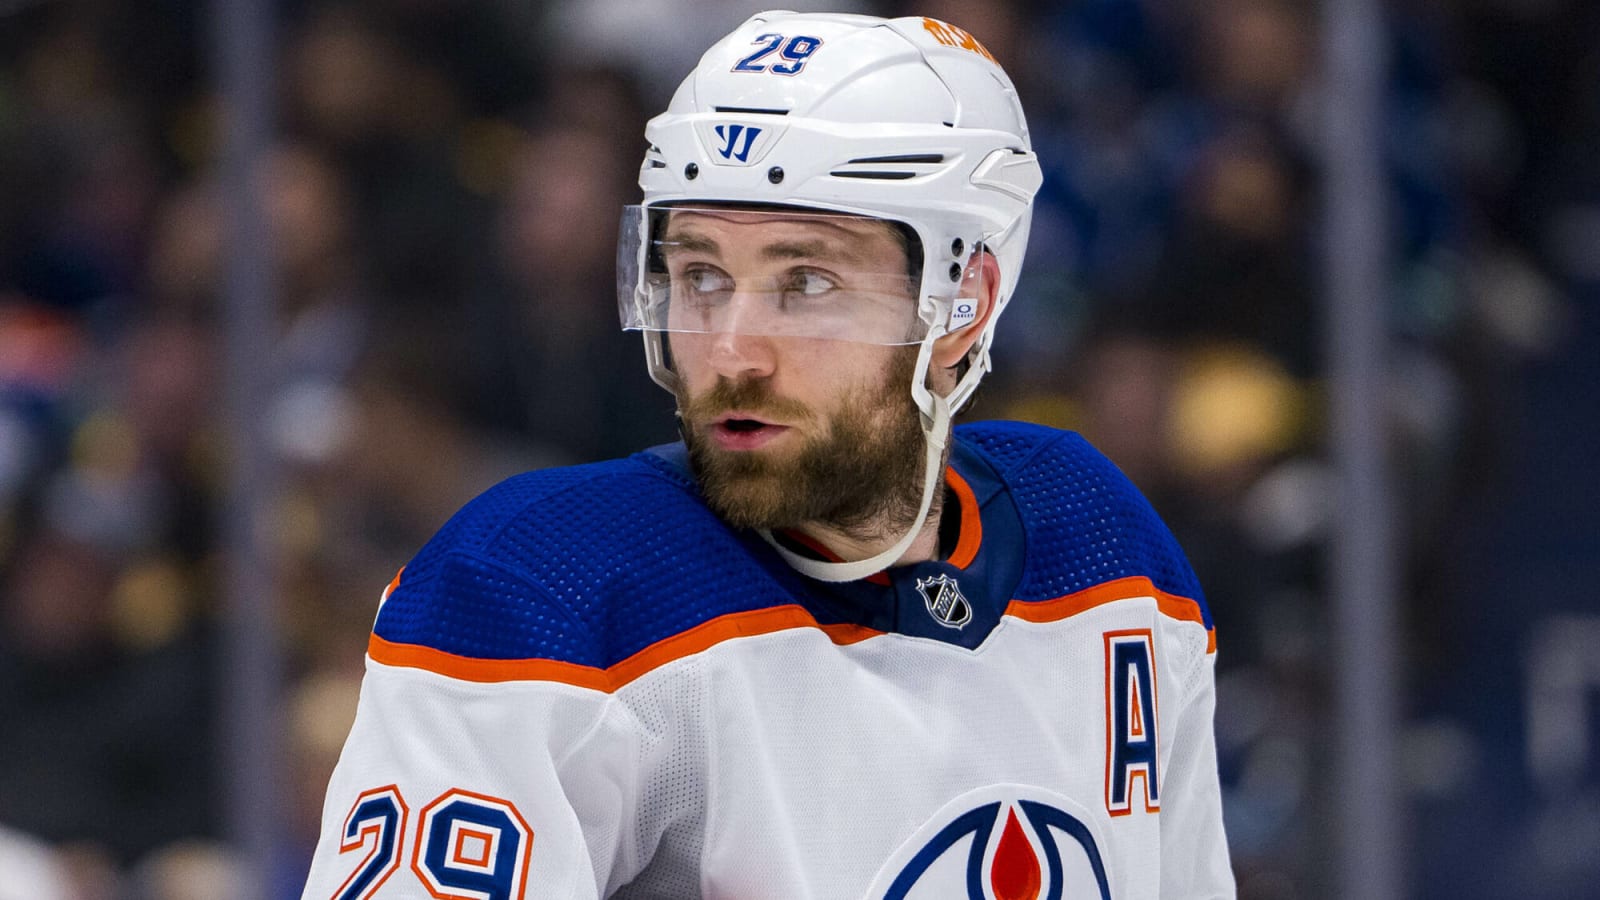 Oilers’ Leon Draisaitl becomes the third-fastest player ever to reach 100 career playoff points